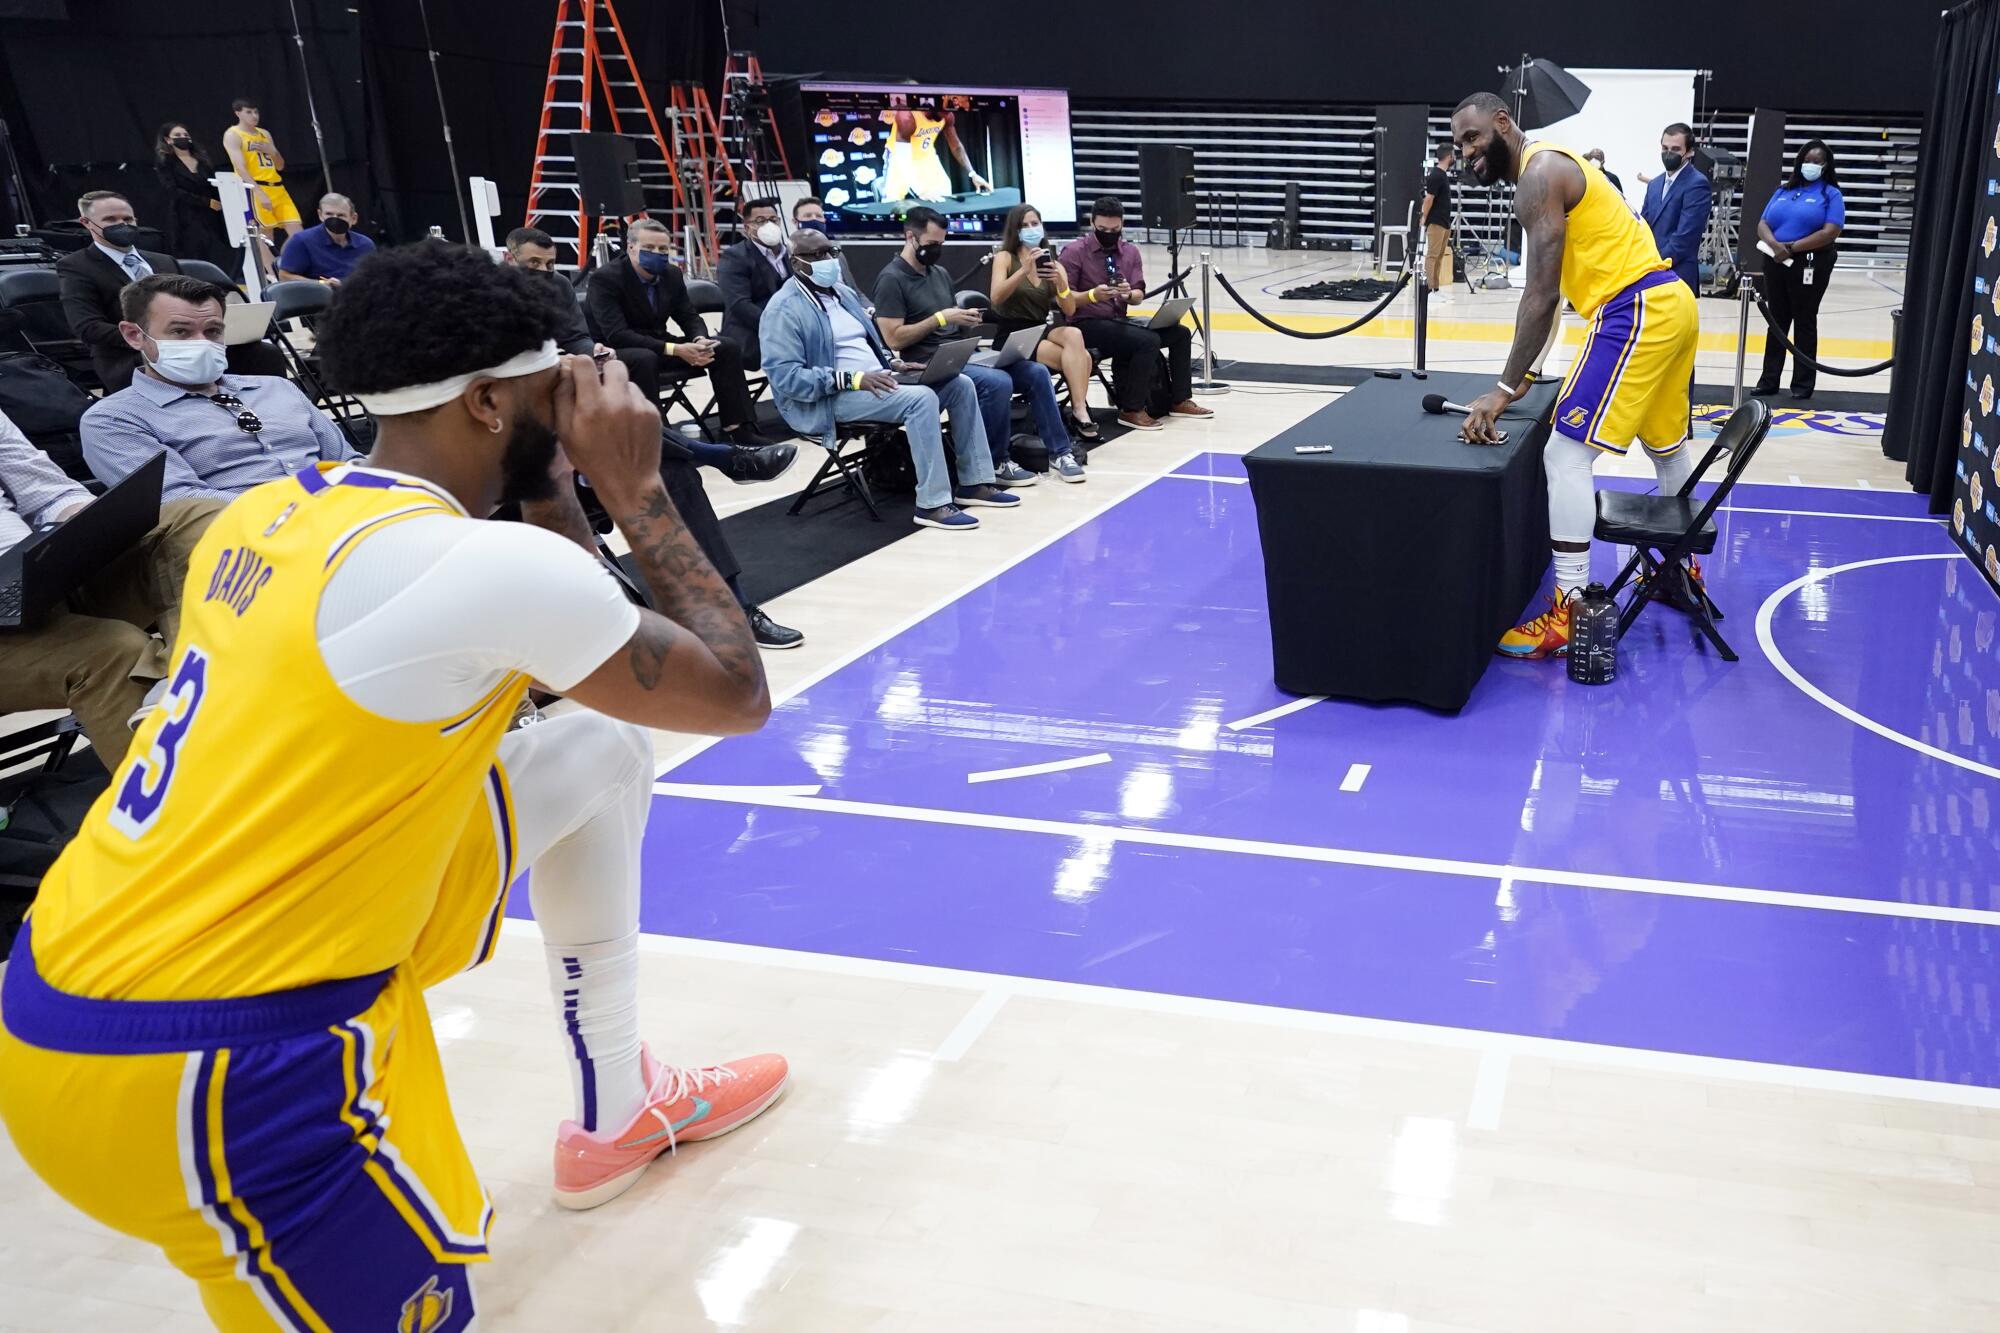 Los Angeles Lakers forward LeBron James, right, has his photo taken by teammate Anthony Davis.